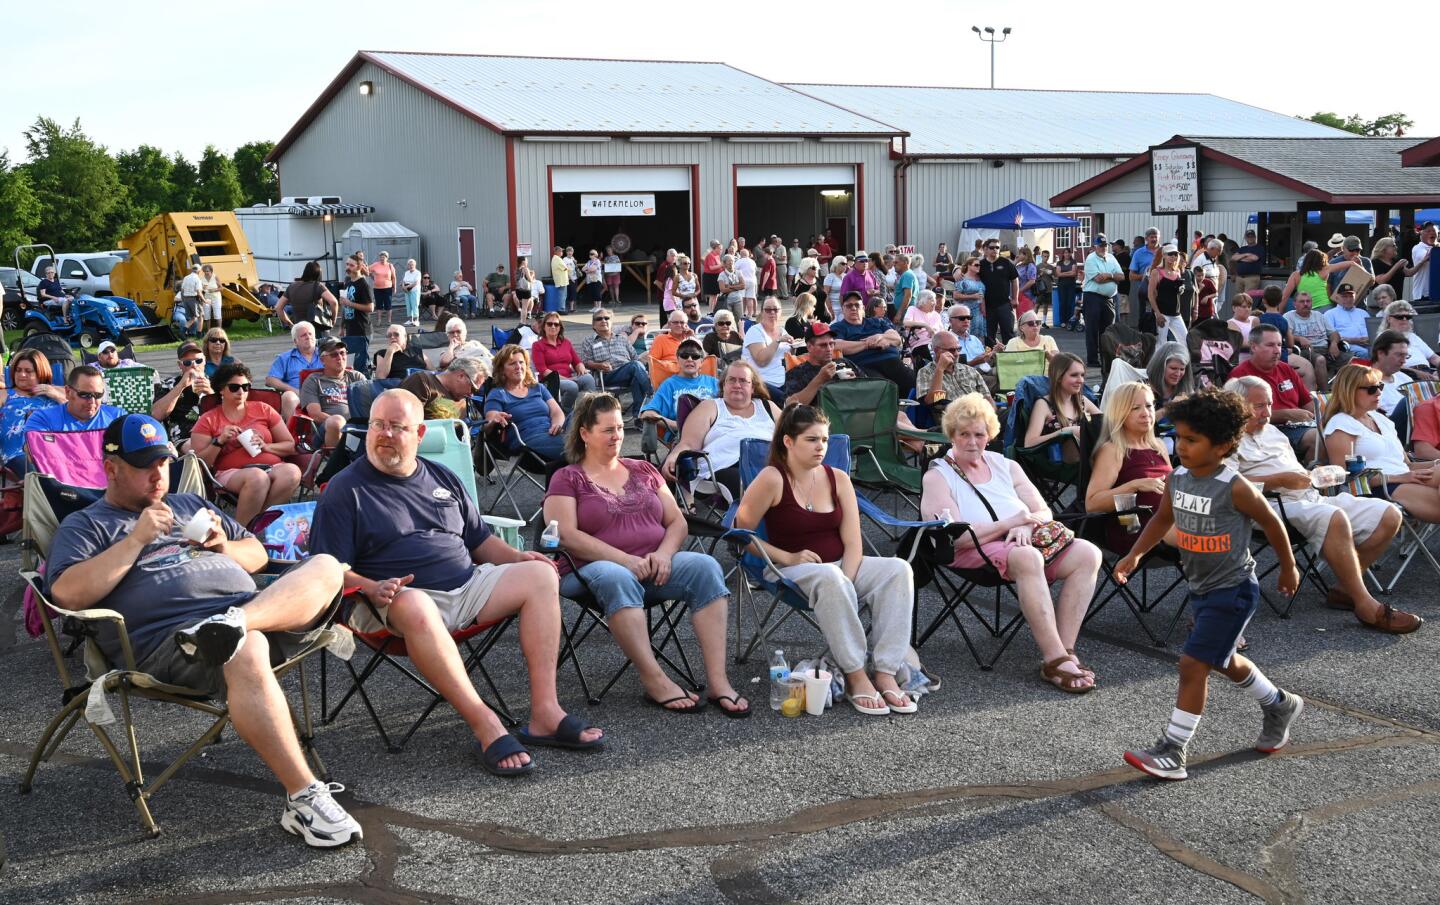 People relax in folding chairs, listening to the night's entertainment during the carnival at the Harney Volunteer Fire Company on Tuesday, June 25.